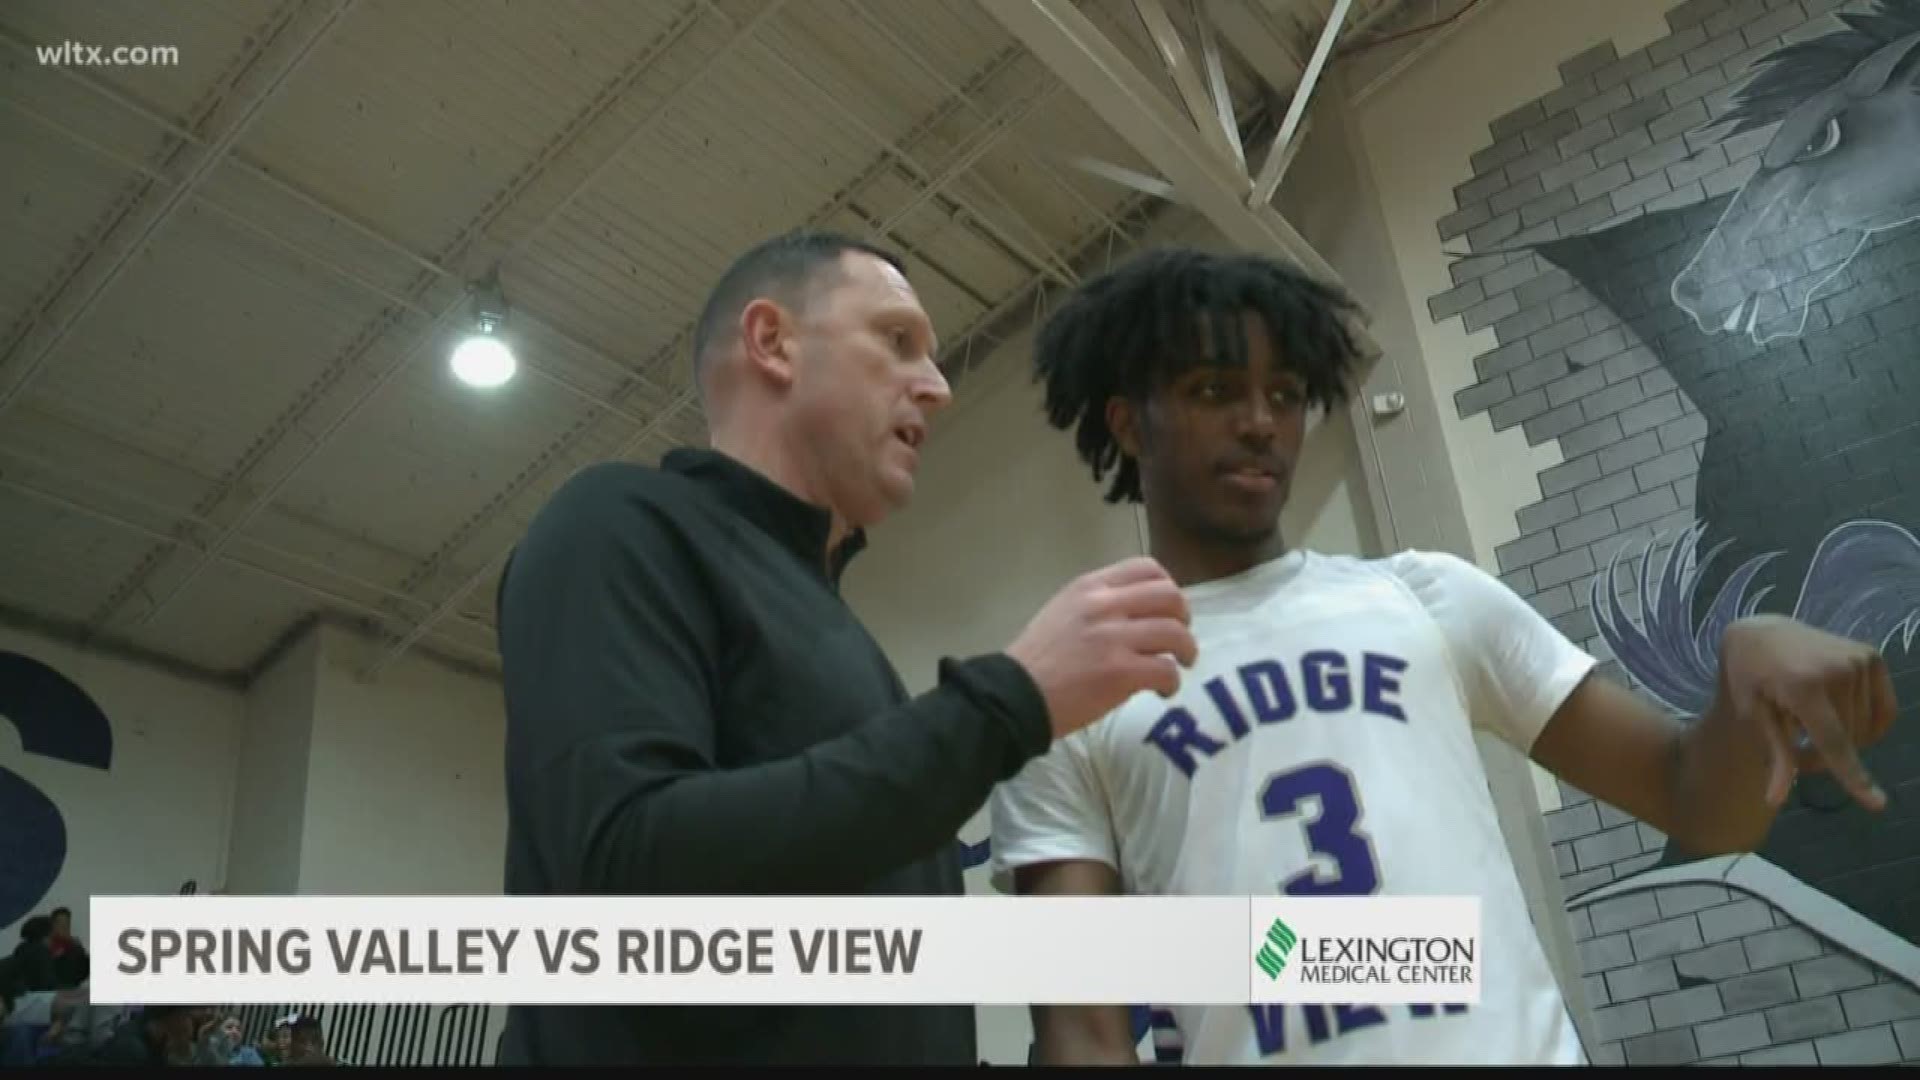 Highlights from games at Blythewood and Ridge View High School